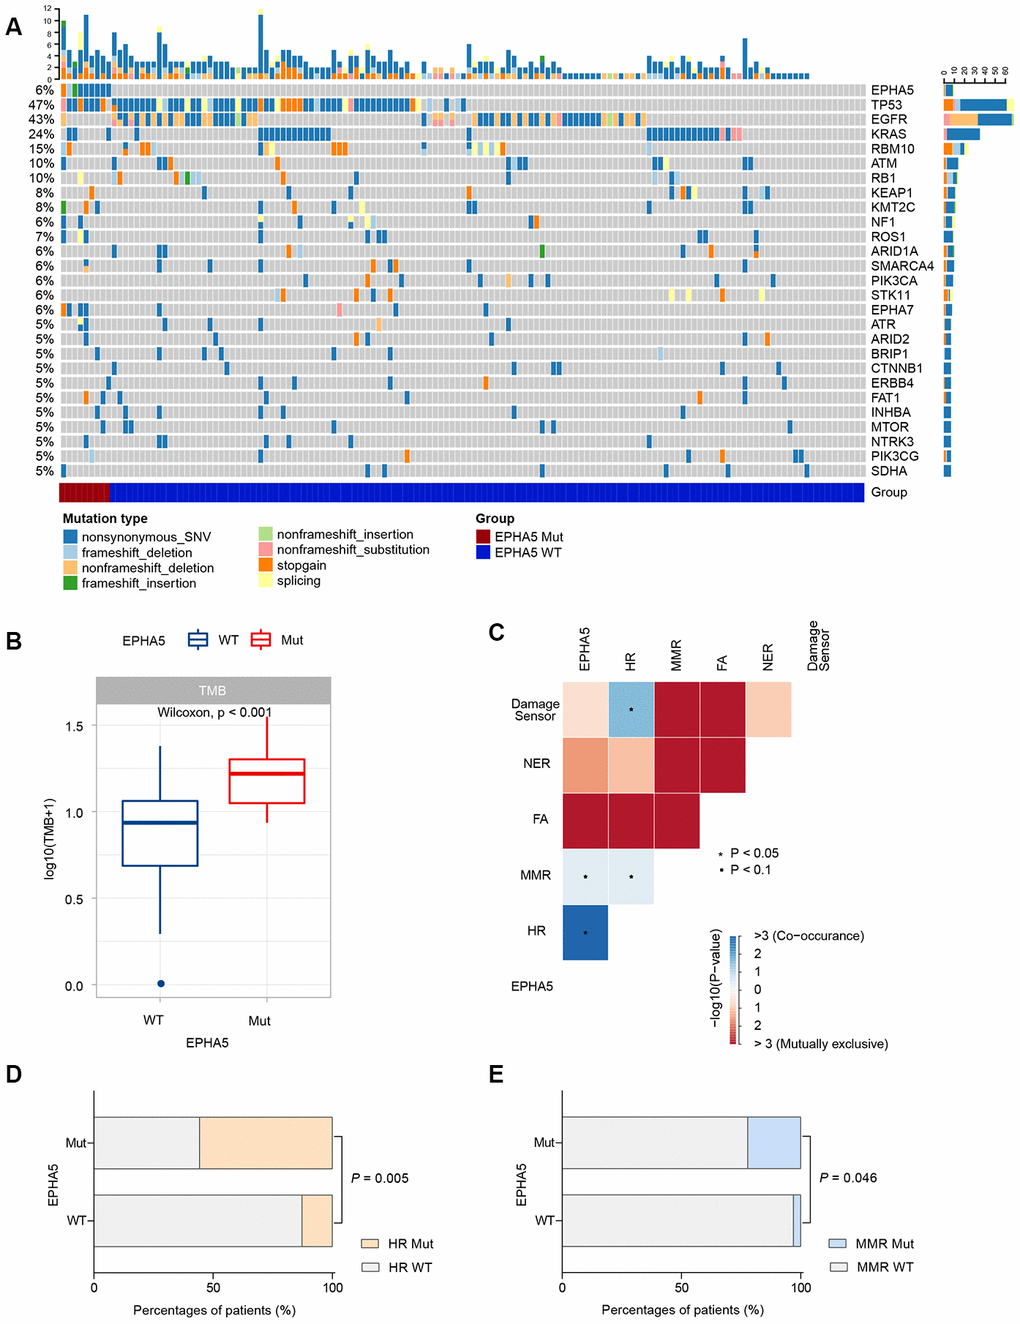 EPHA5 mutation is correlated with increased TMB and occurred concurrently with DNA repair pathways in Chinses LUAD patients. (A) Mutational landscape of the Chinese LUAD cohort. (B) EPHA5-Mut tumors had a markedly higher TMB than EPHA5-WT tumors. (C) EPHA5 mutations occurred concurrently with HR and MMR pathways. Markedly higher proportion of (D) HR and (E) MMR pathway mutations were observed in EPHA5-Mut group.